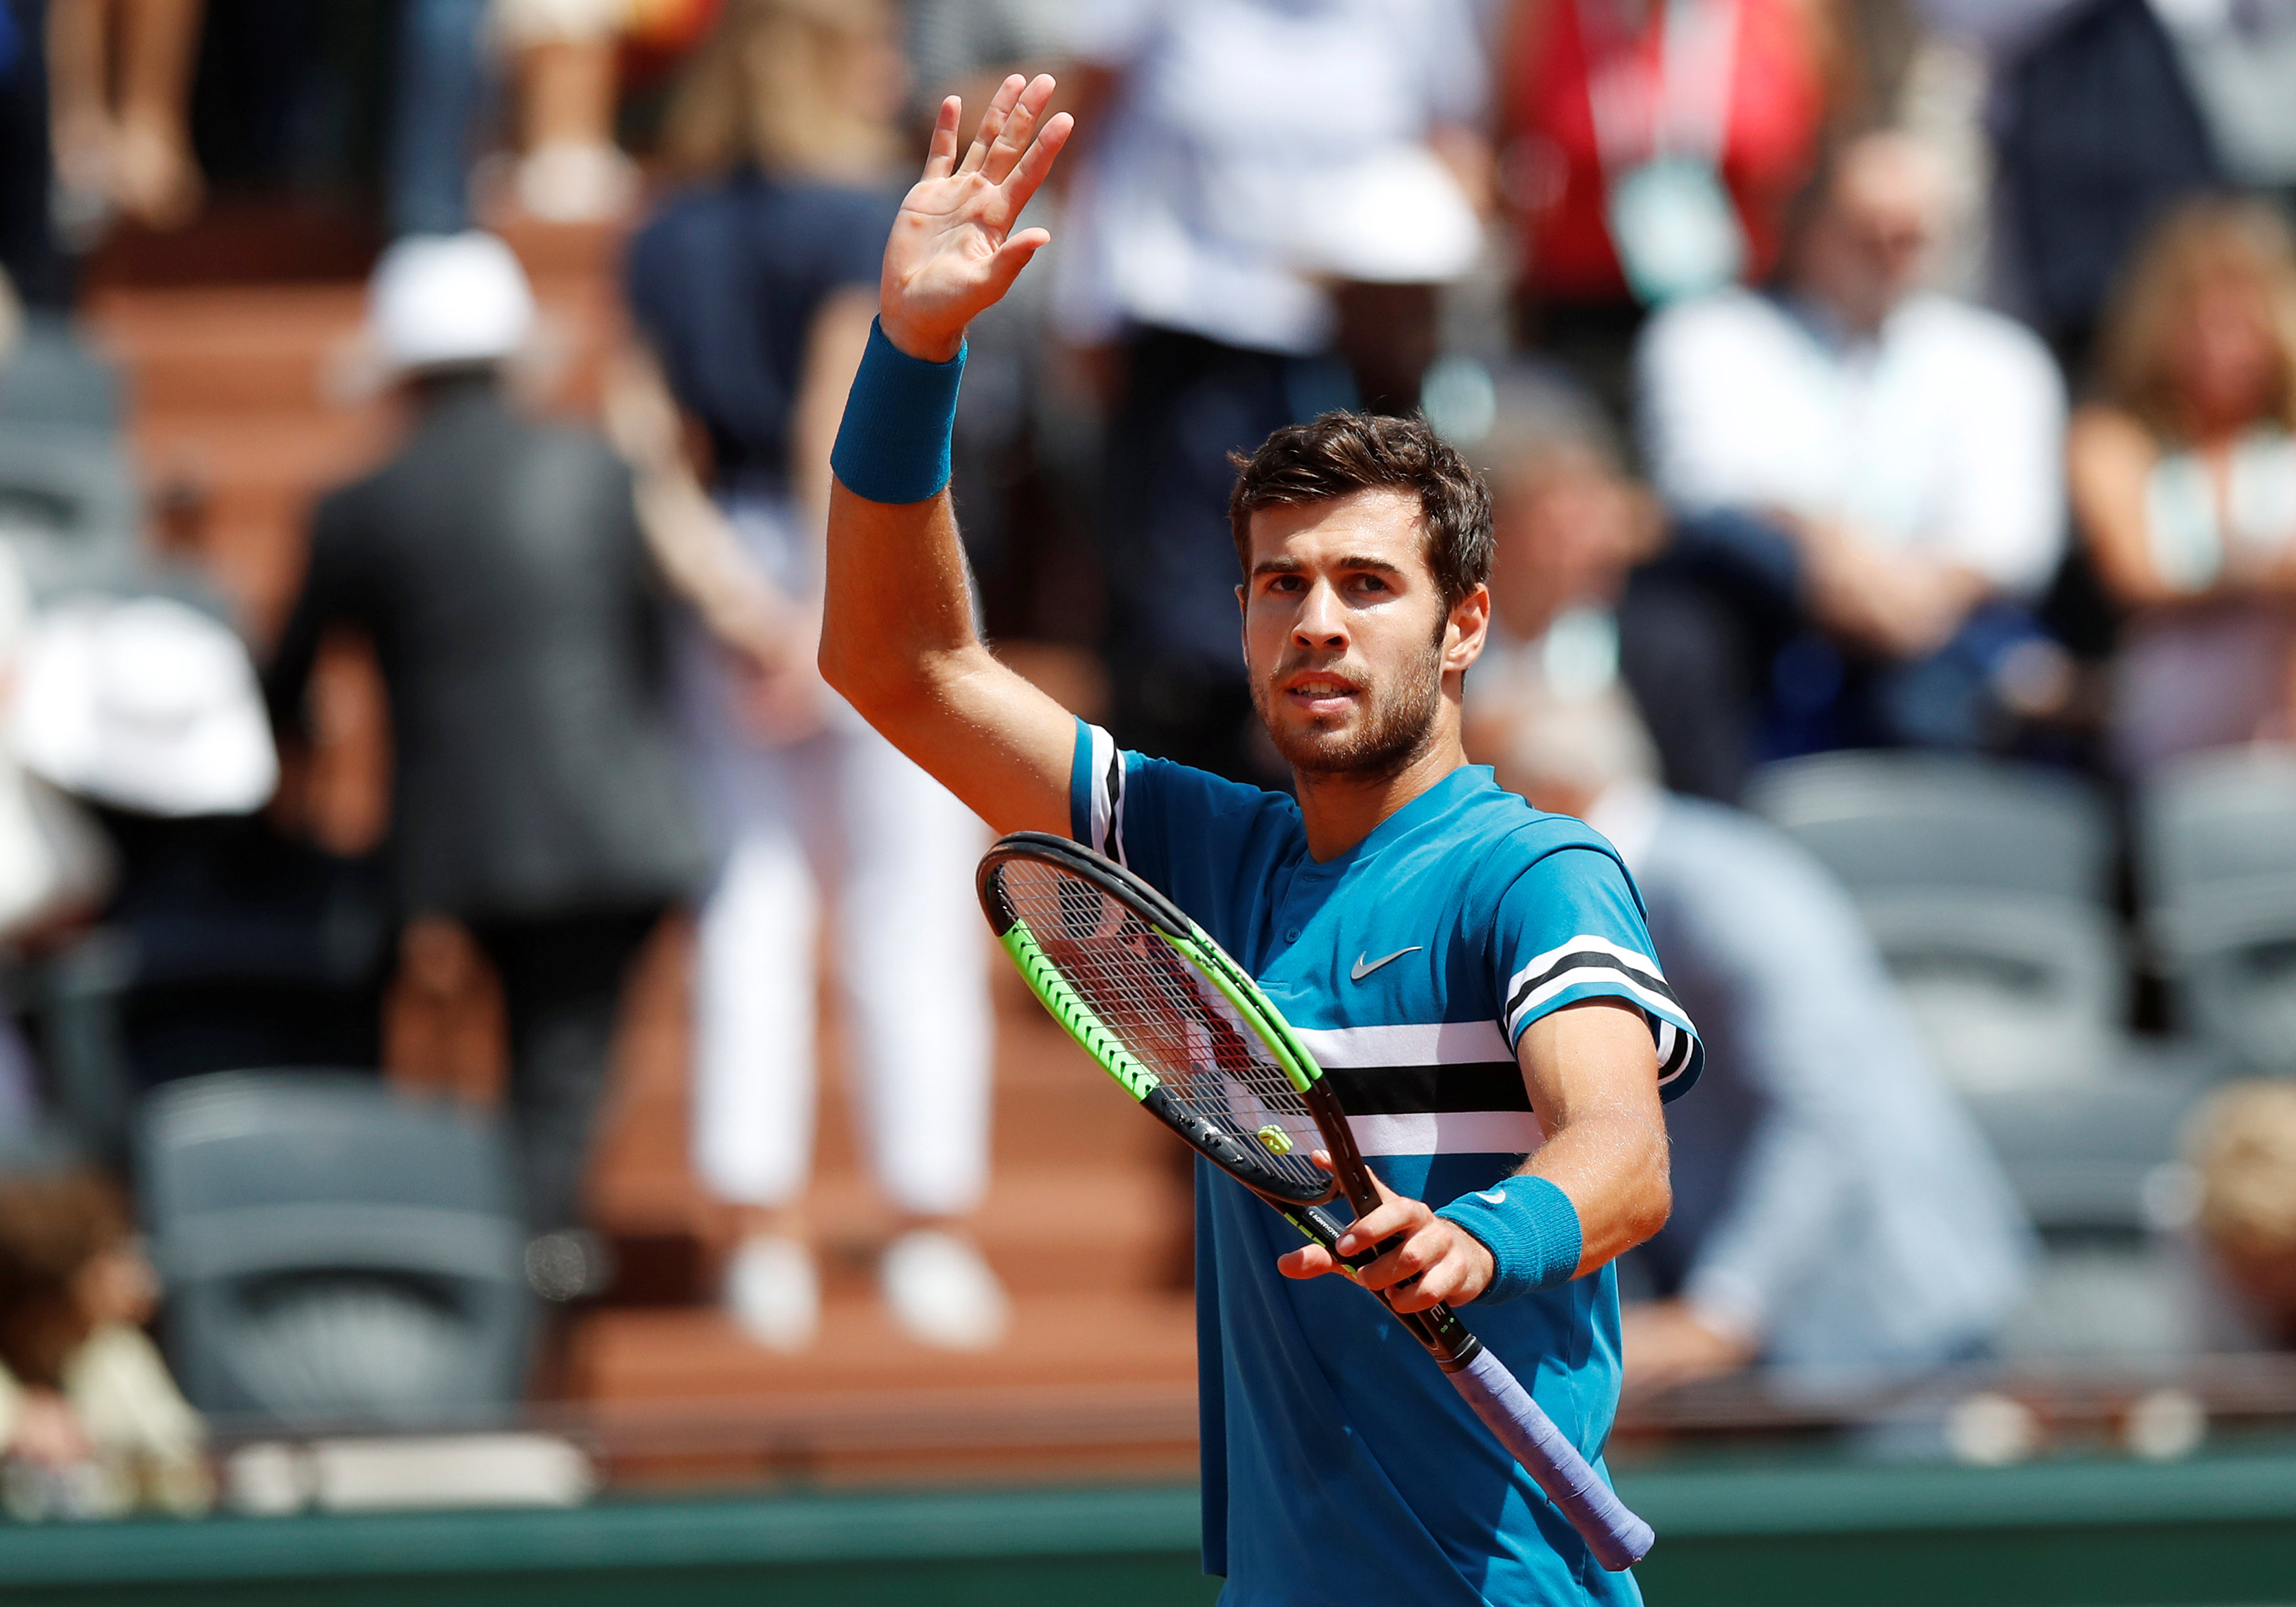 French Open: Khachanov downs Pouille to set up Zverev clash